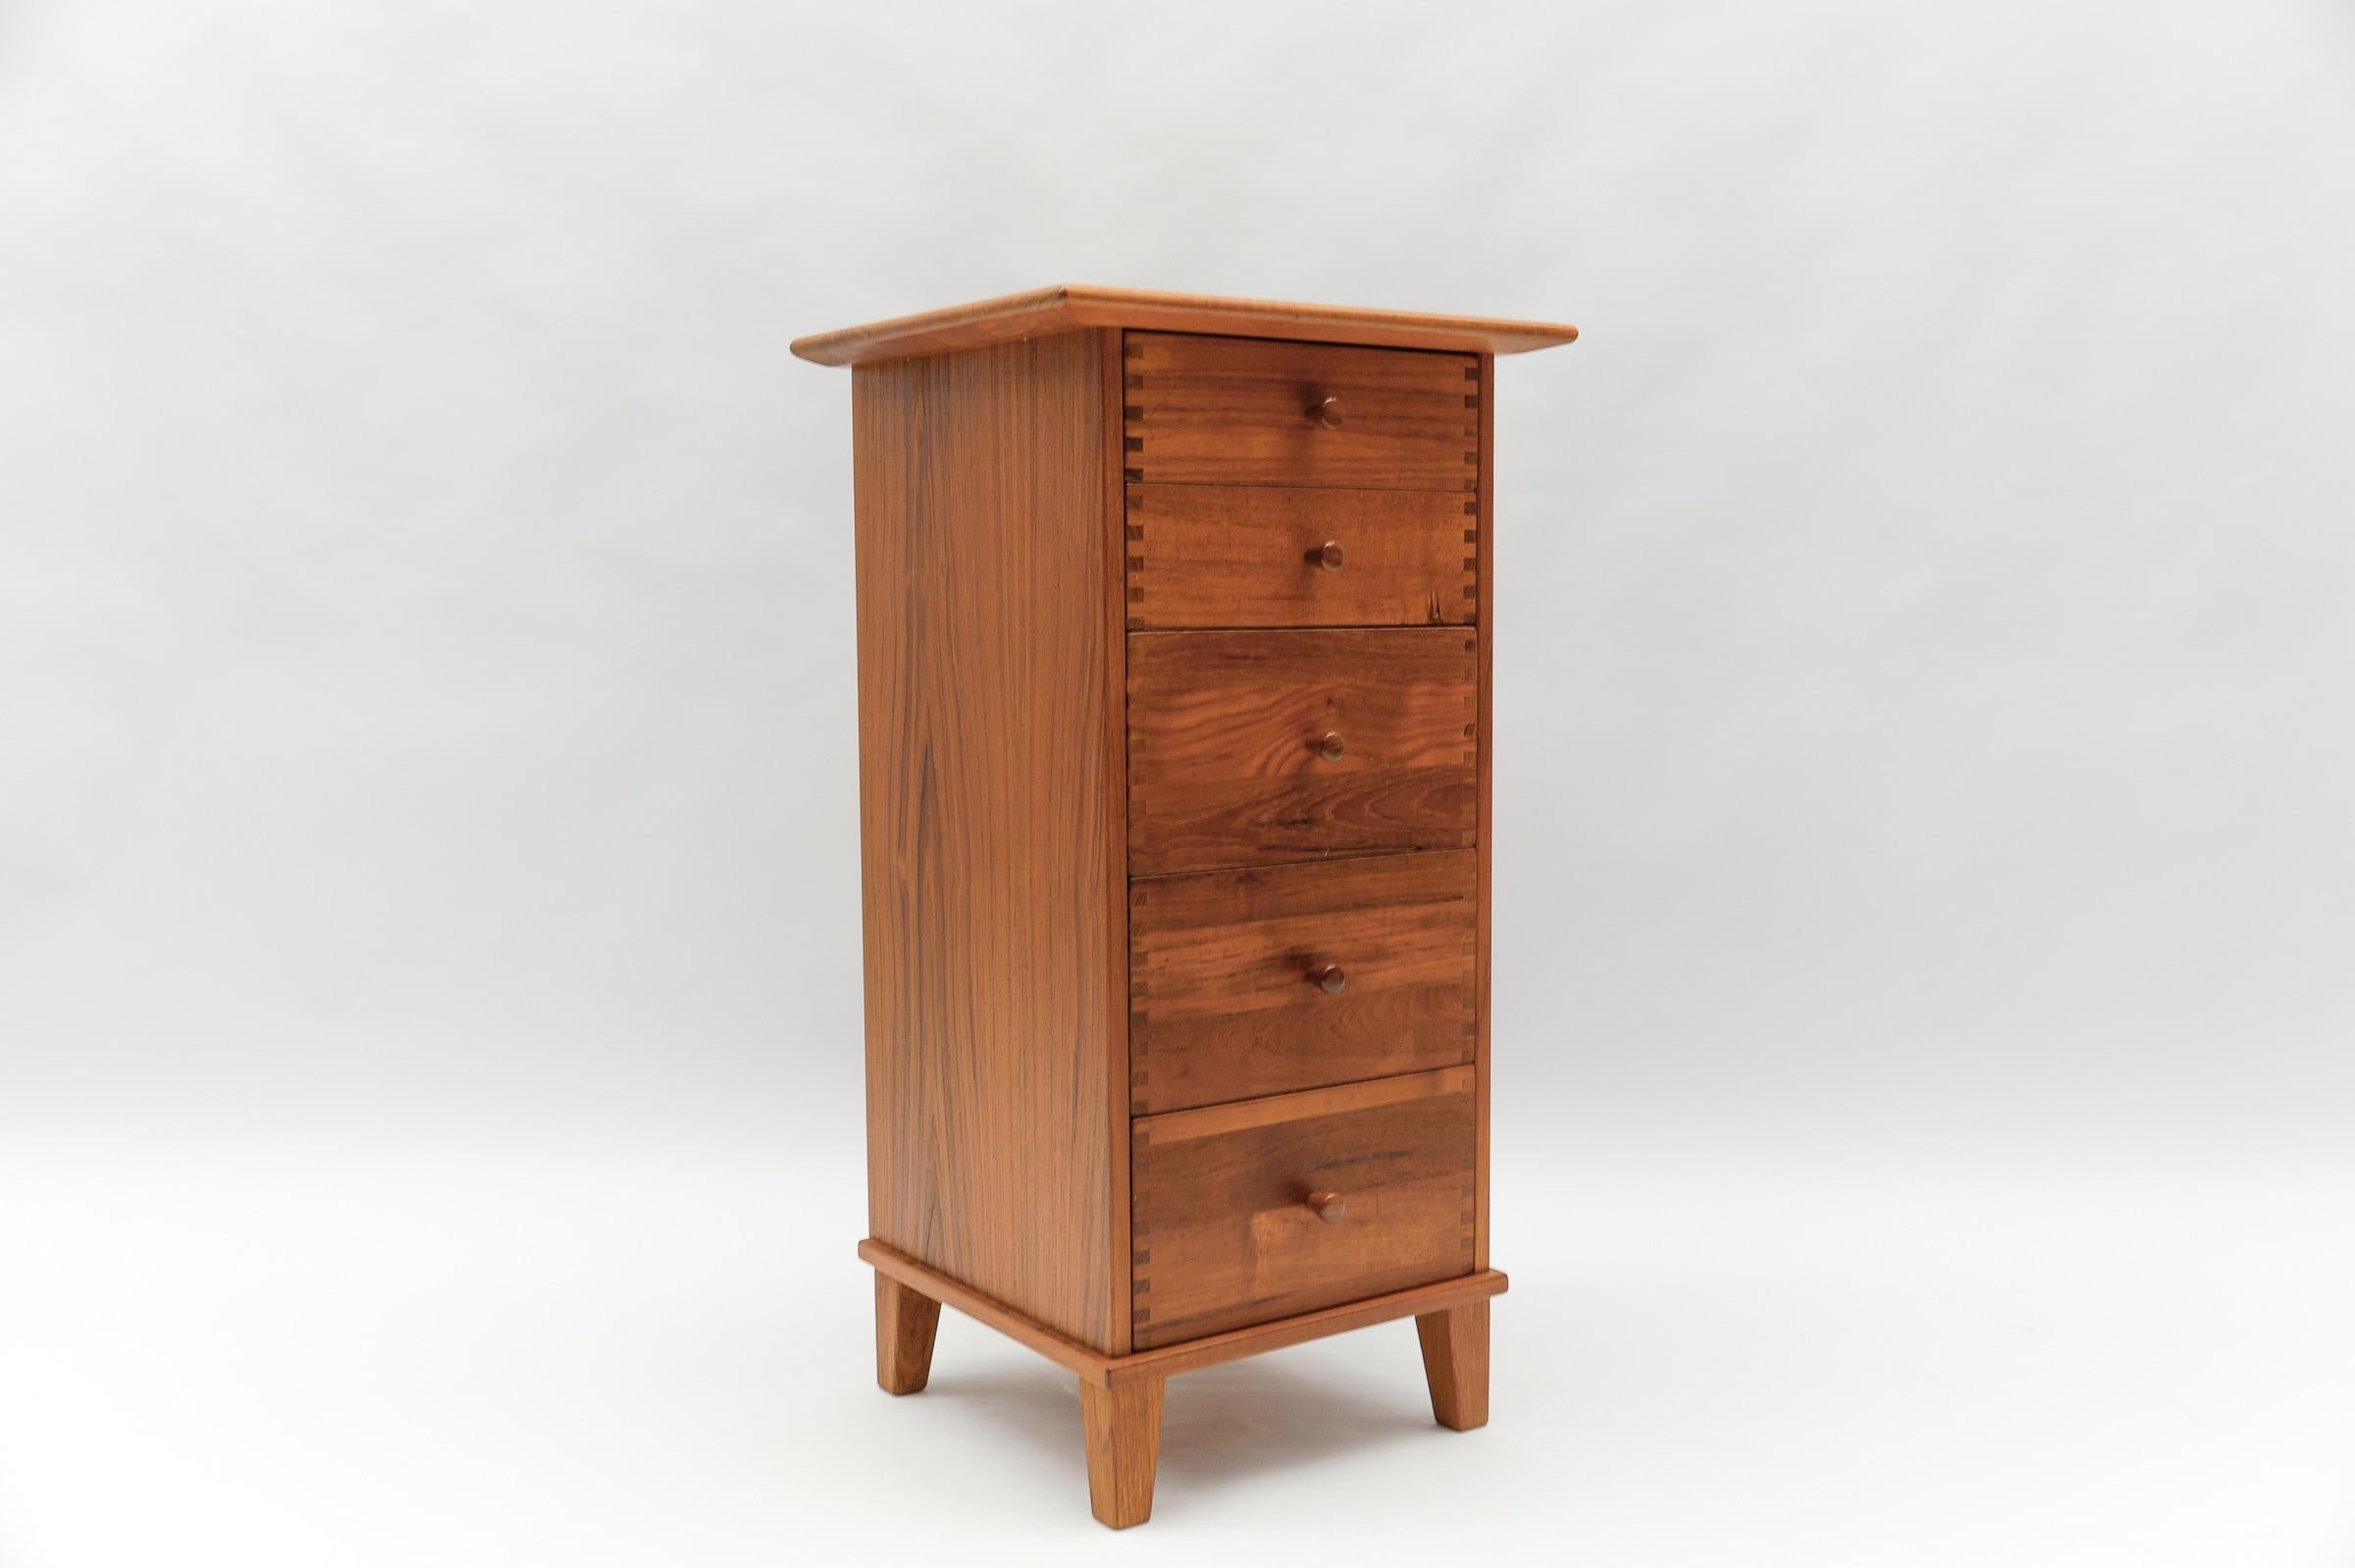 A gorgeous Danish modern five-drawer teak lingerie chest by Aksel Kjersgaard.

Ca. 1970s. Made in Denmark.

The chest is exquisite. The quality is top notch with all solid wood dovetailed drawers and a finished back. The top has an overhang and